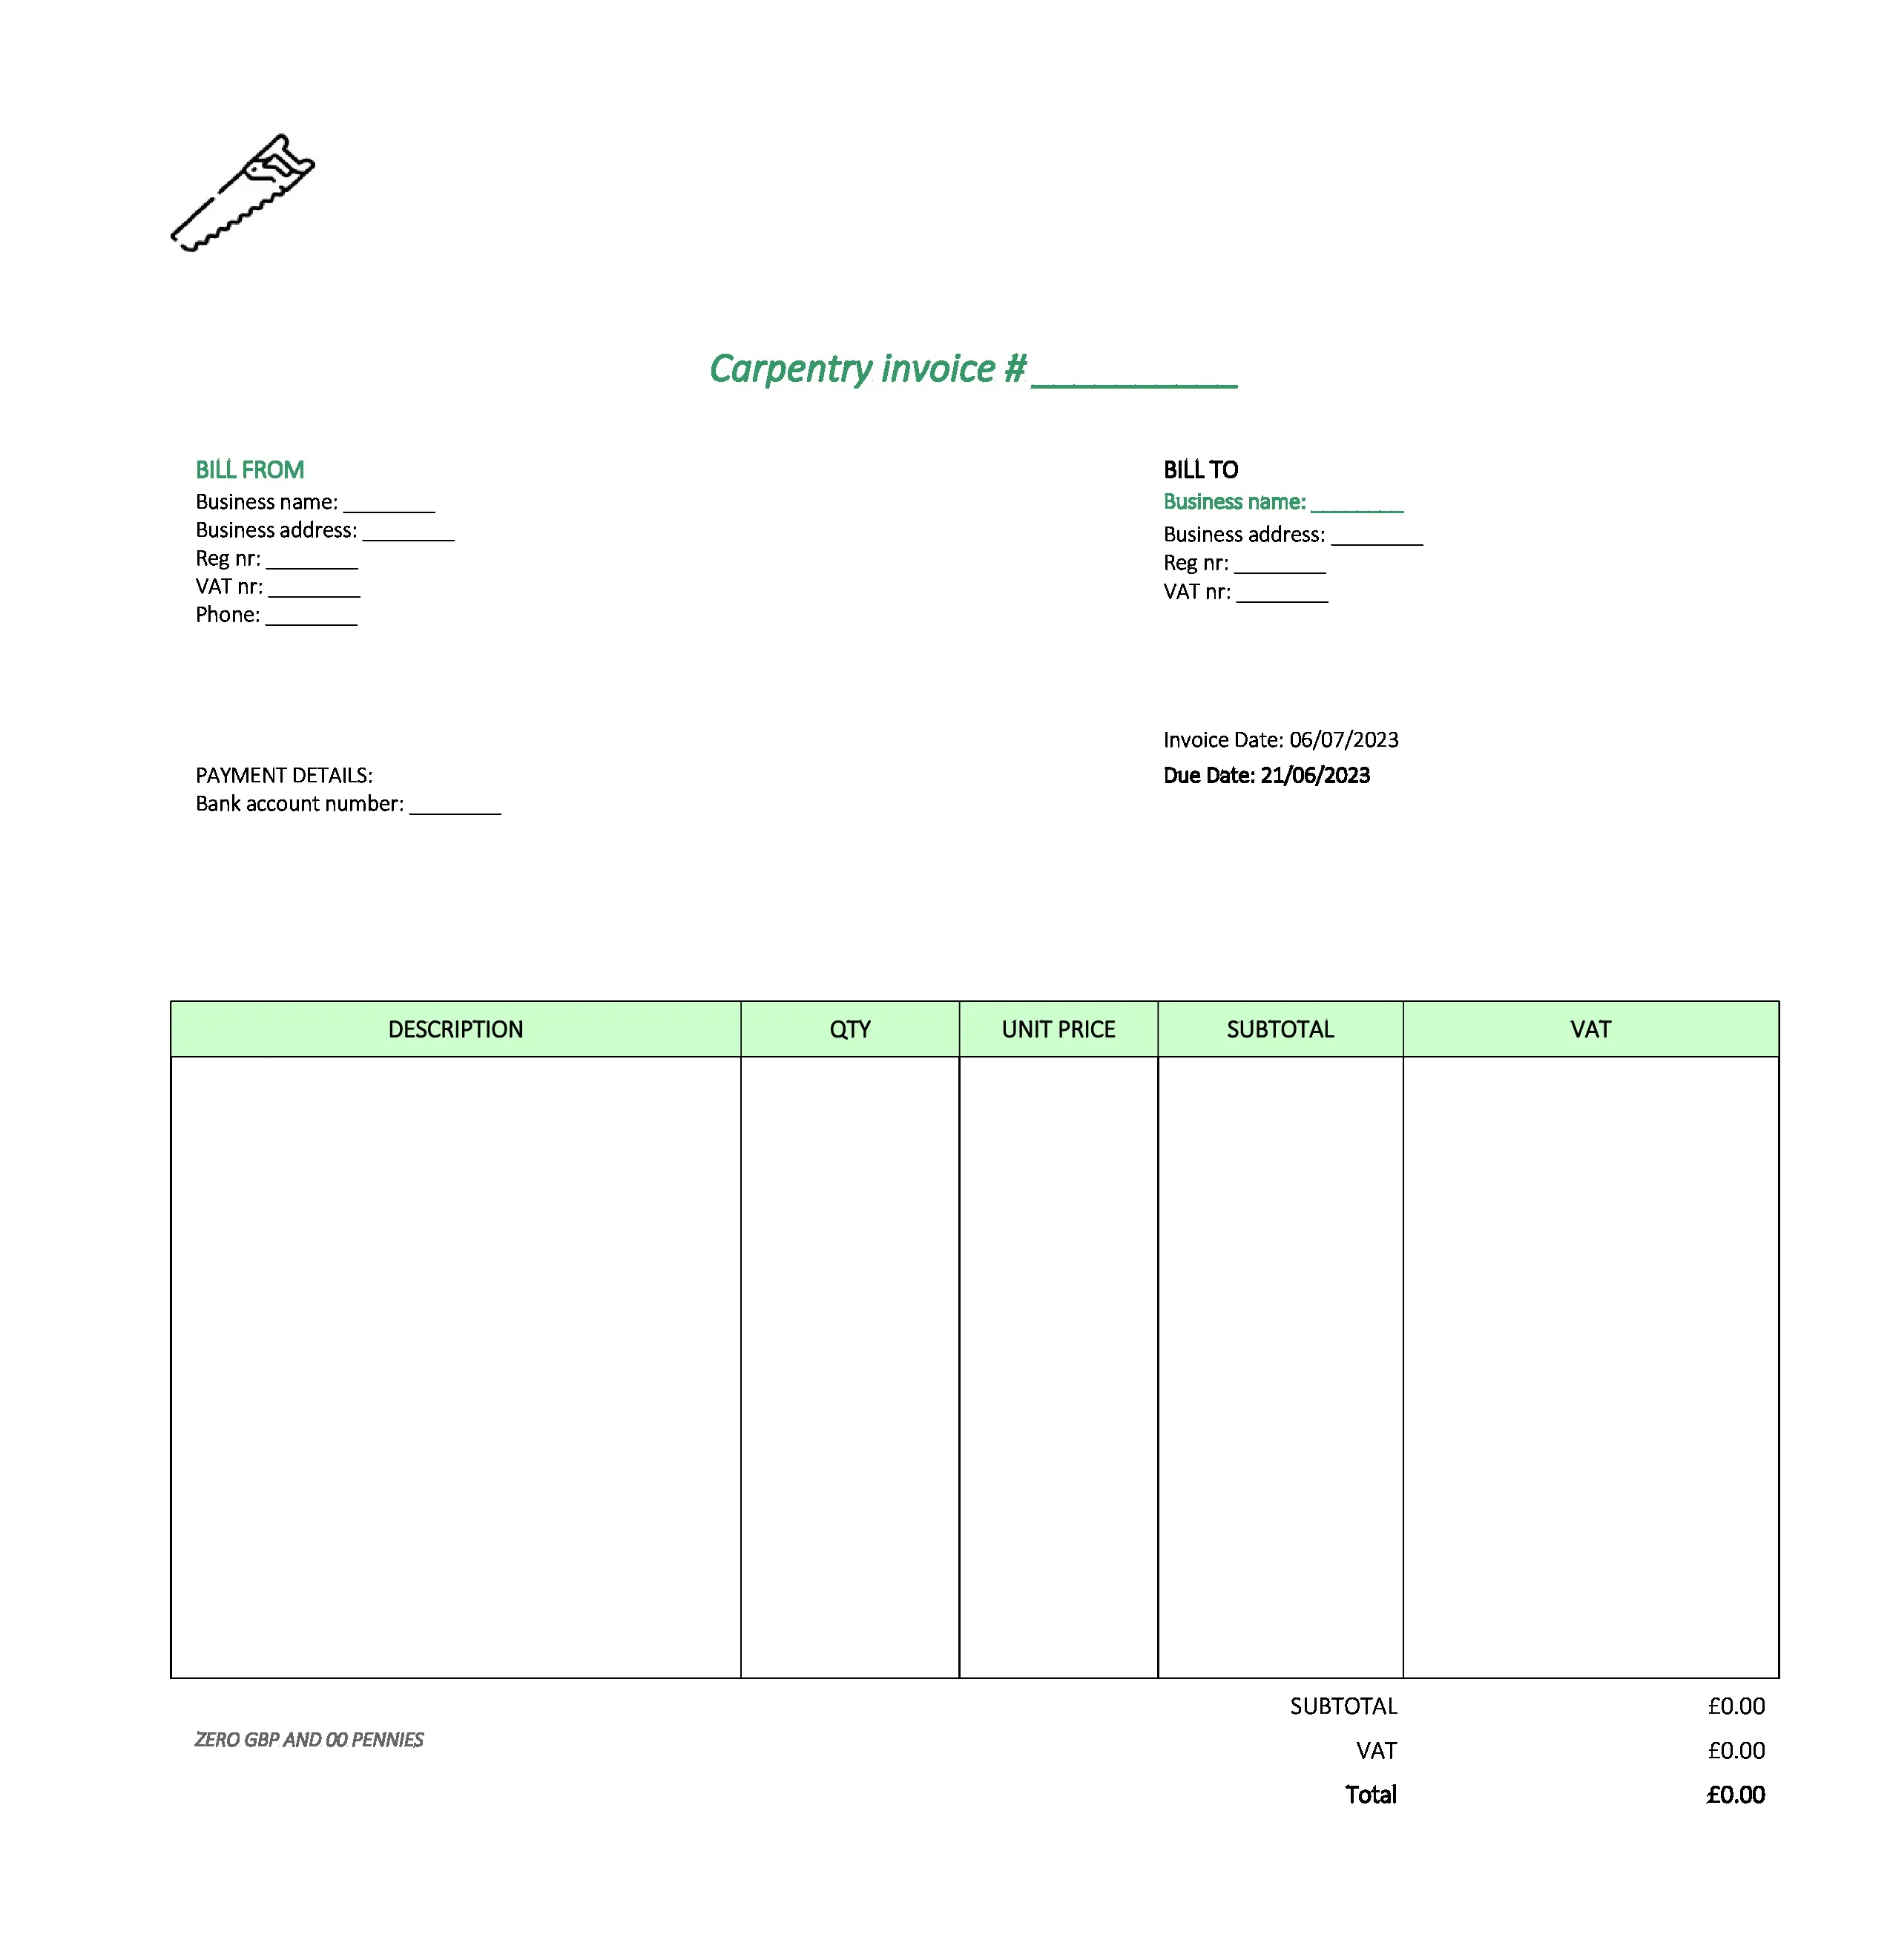 with logo carpentry invoice template UK Excel / Google sheets